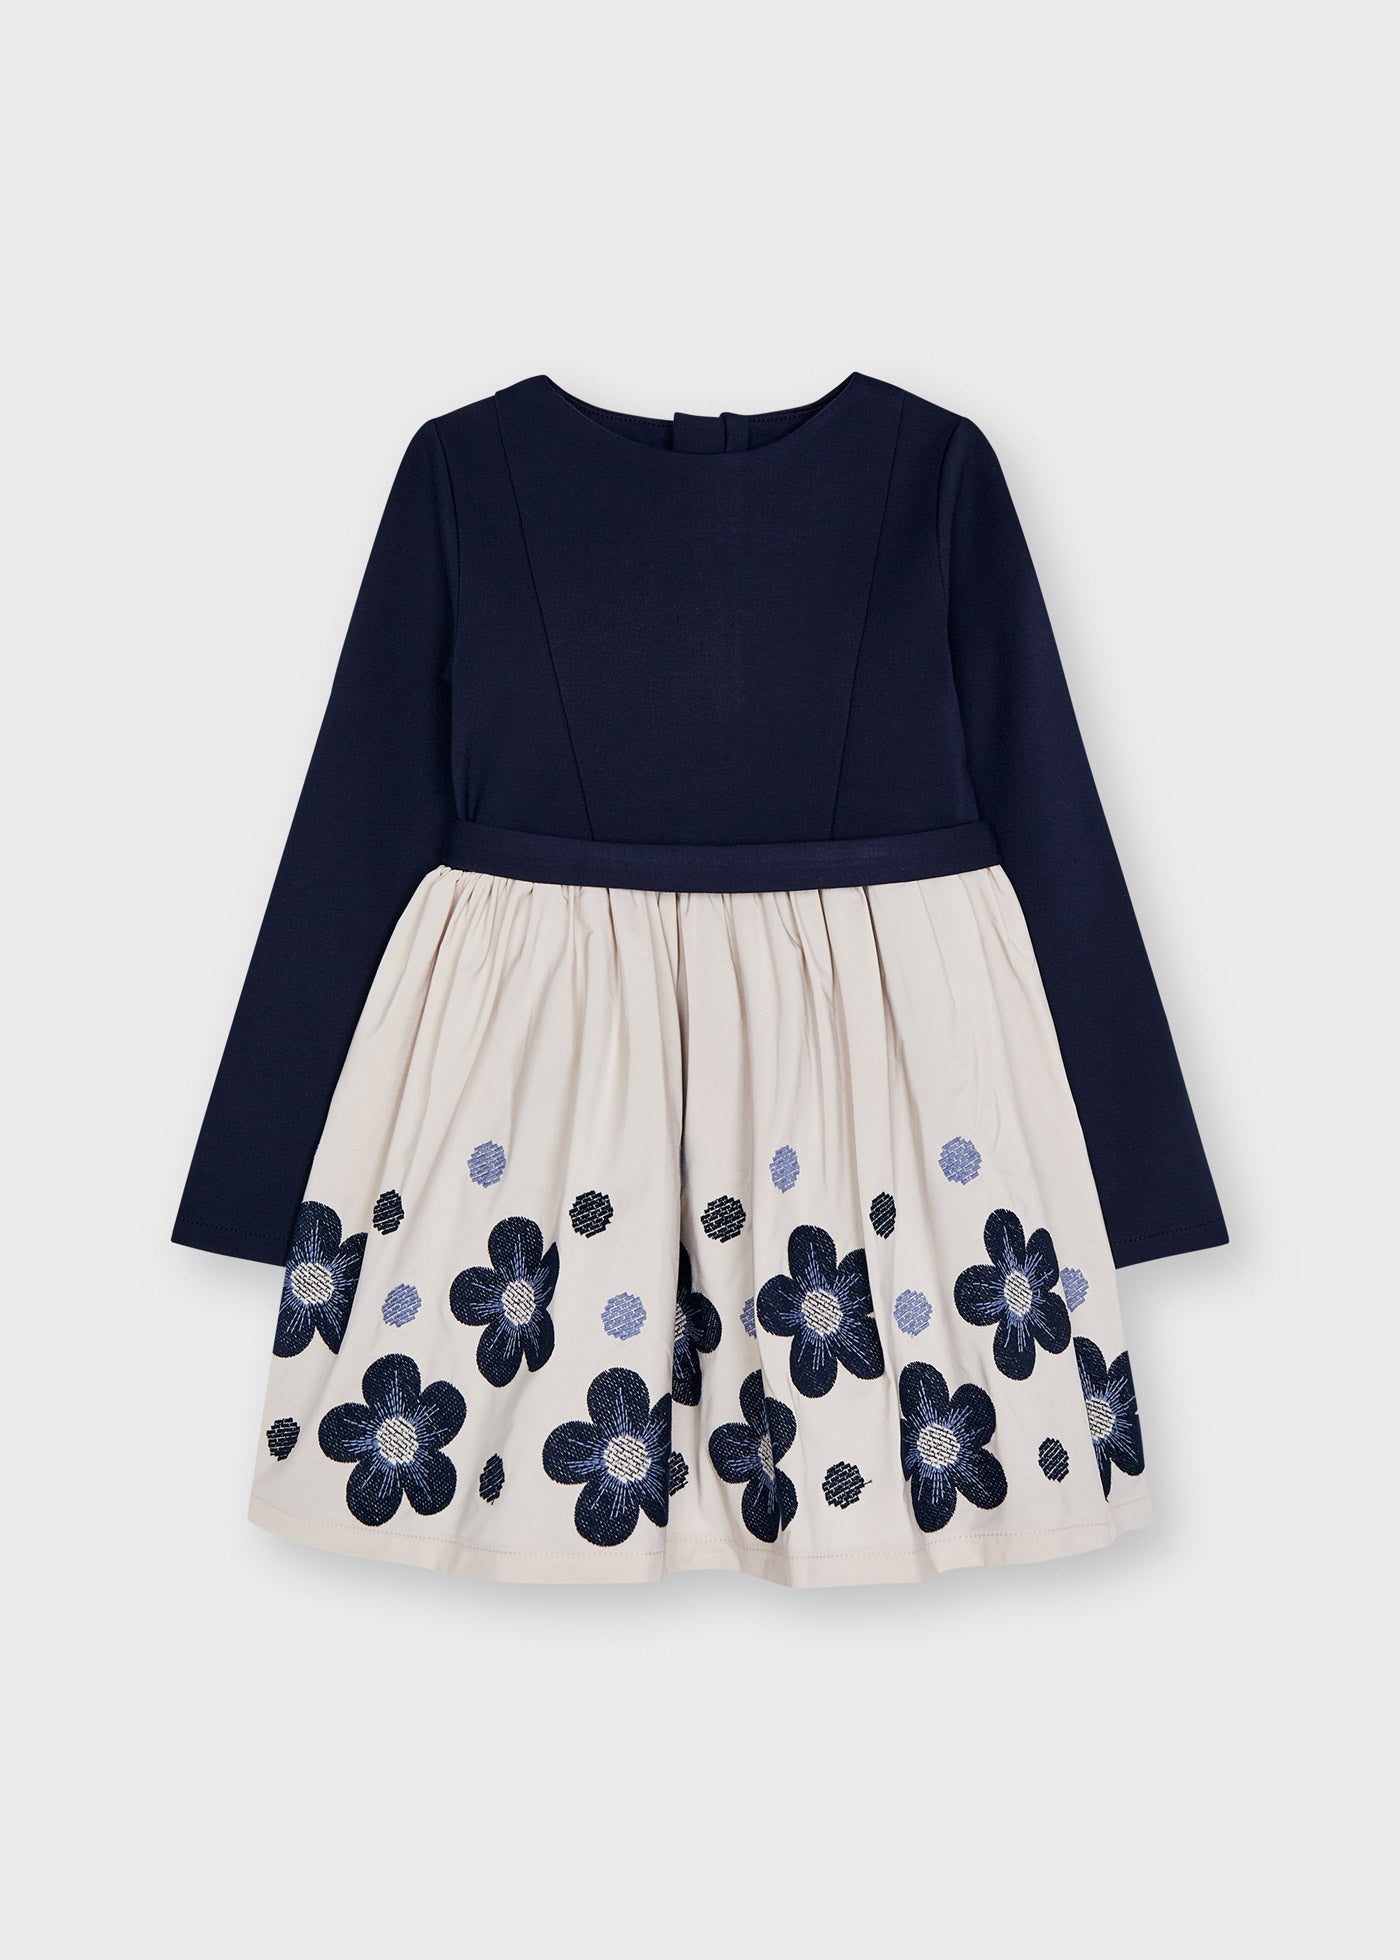 MAYORAL Girls Navy Flower Embroidered Dress - NON RETURNABLE